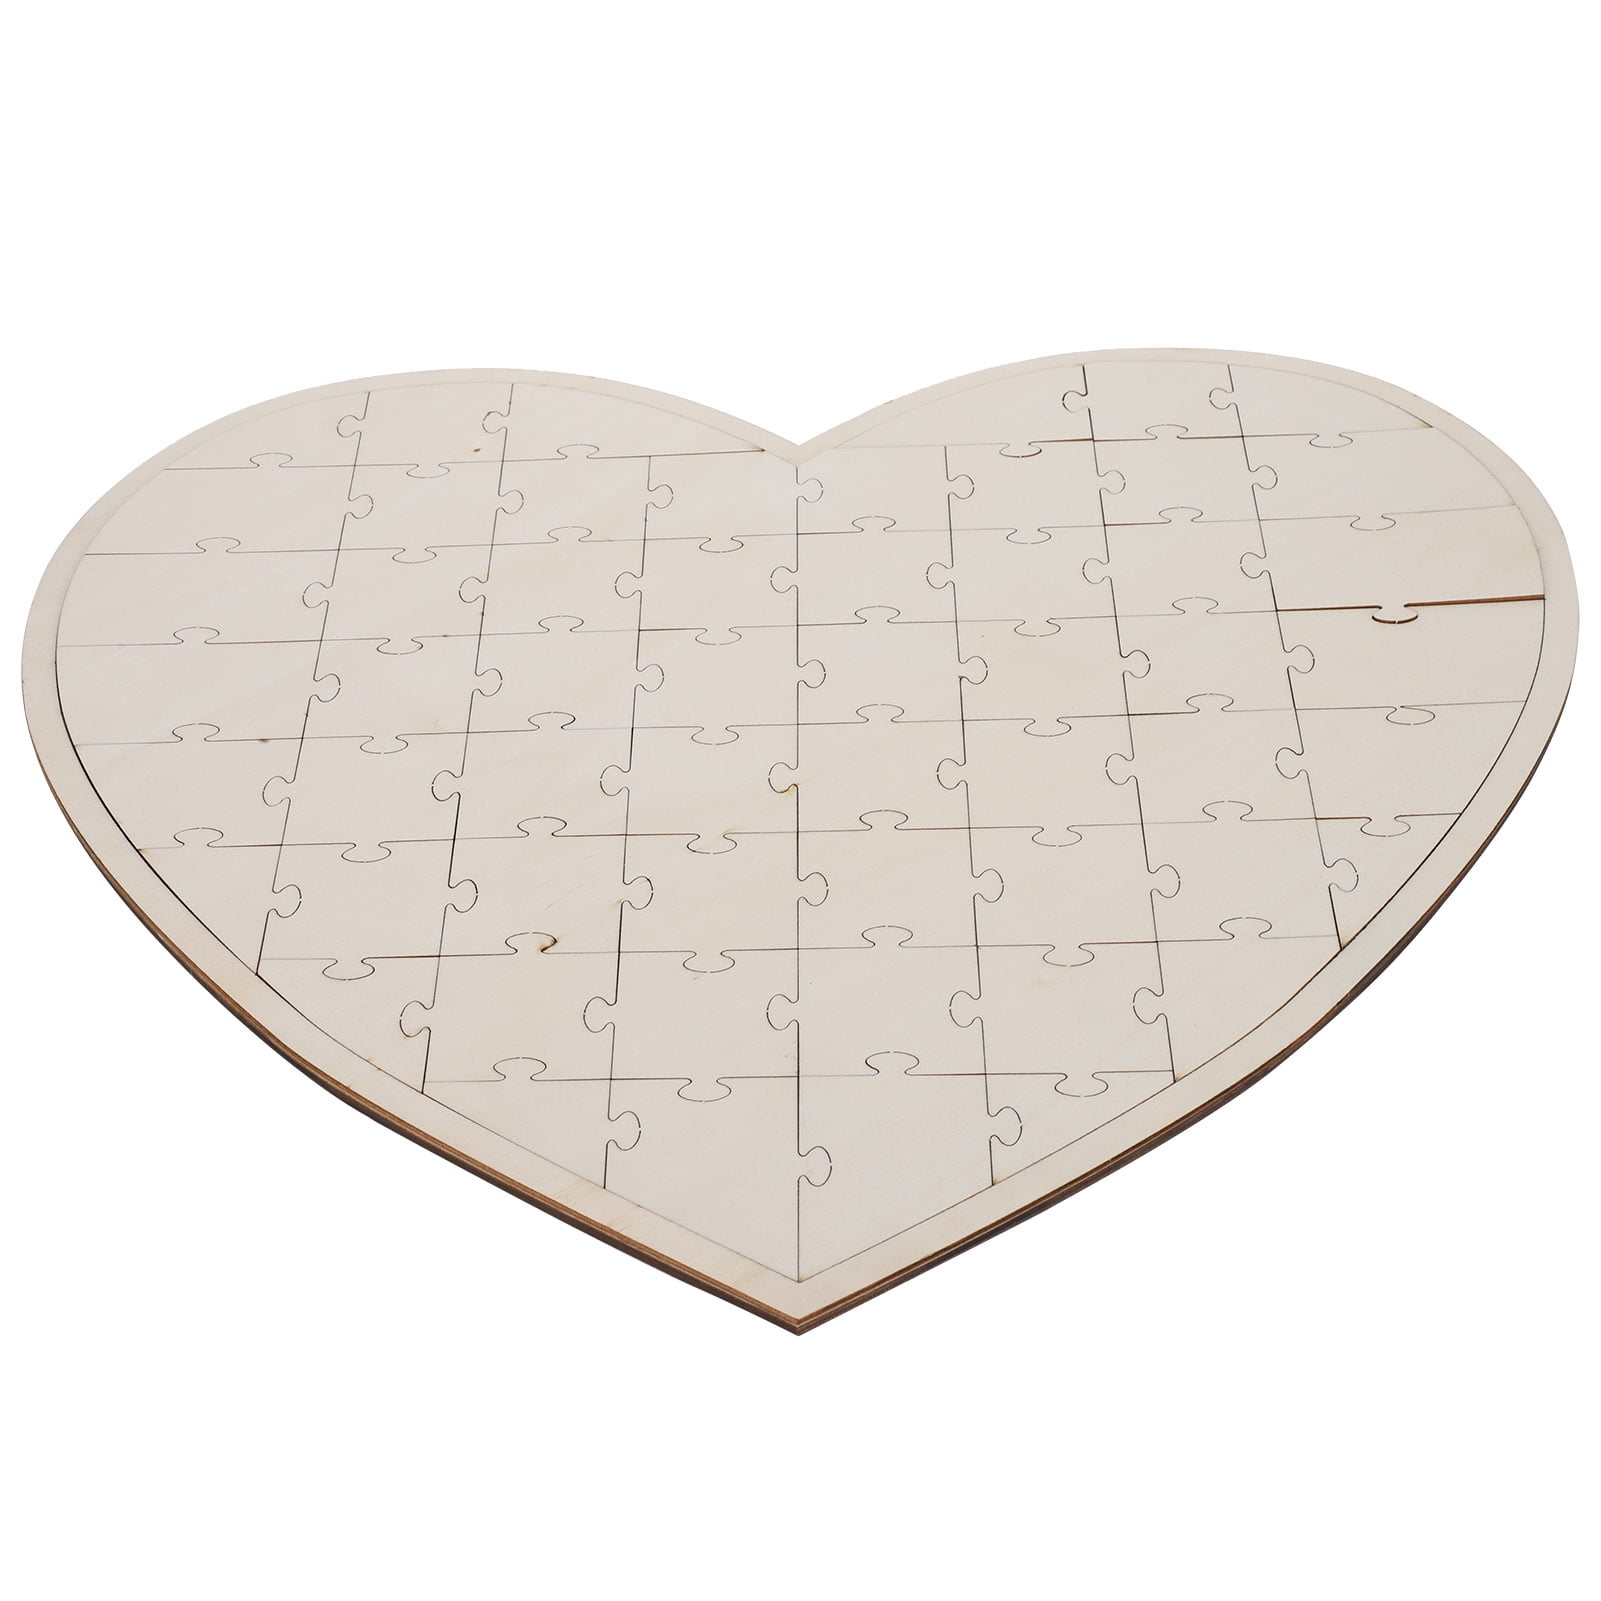 Details about   Wooden Heart Puzzle Wedding Games Personalization Message Board Craft Decor 